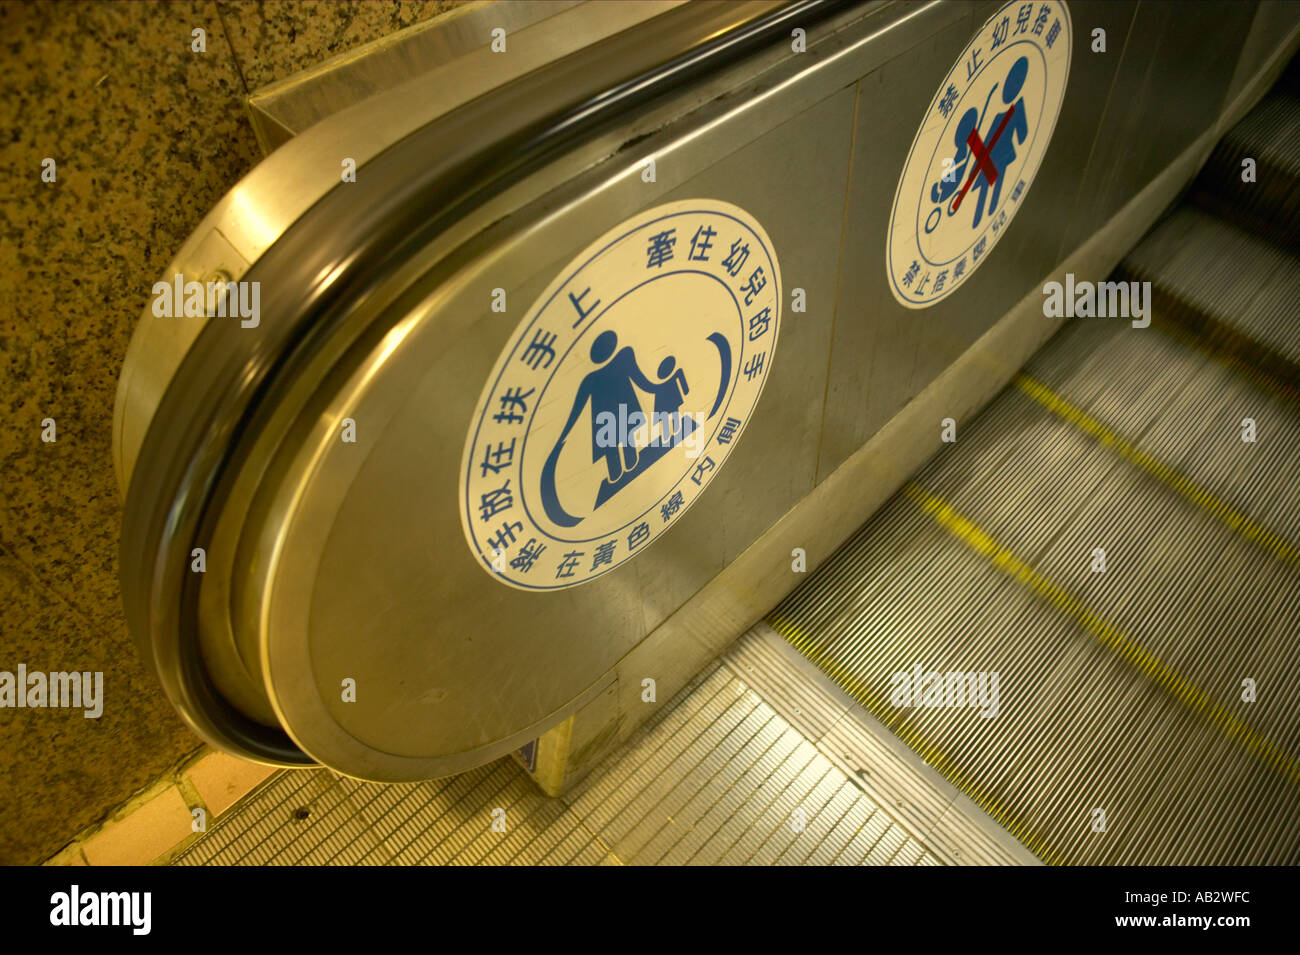 Signs on an escalator in Tokyo Japan Stock Photo